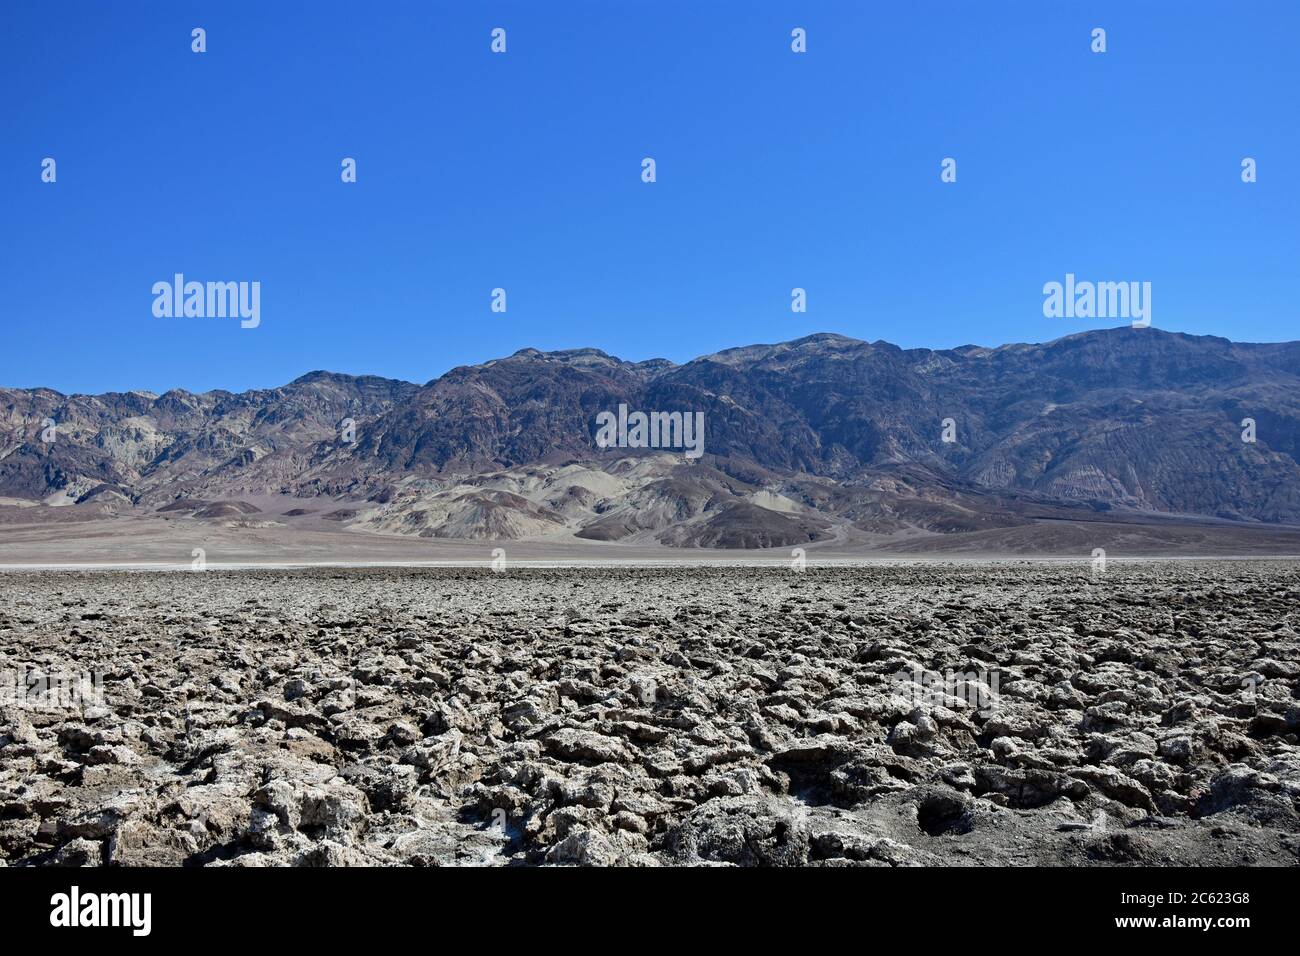 Devils Golf course in Death Valley National Park. Sharp and jagged salt crystals rise from the ground on a clear day with mountains in the background. Stock Photo